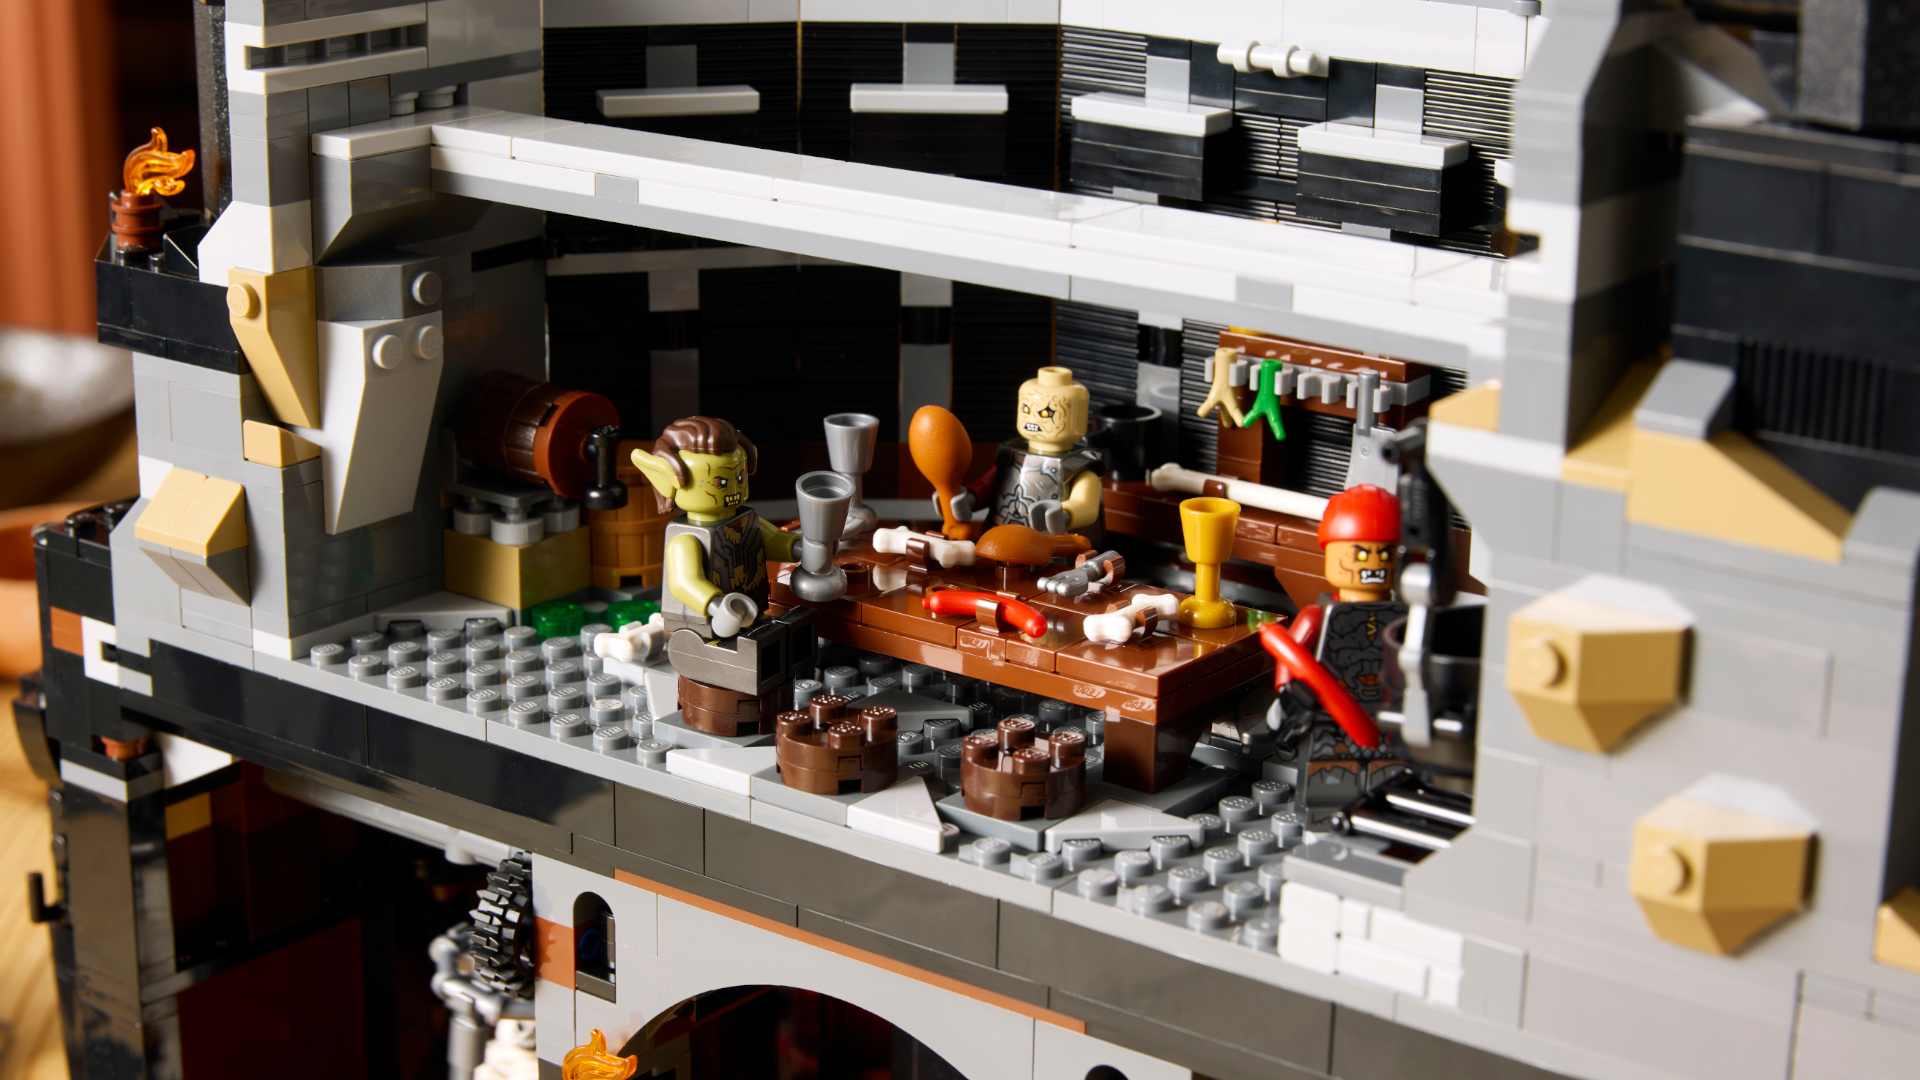 Lego Barad-dur mess hall, with orcs sat around a table